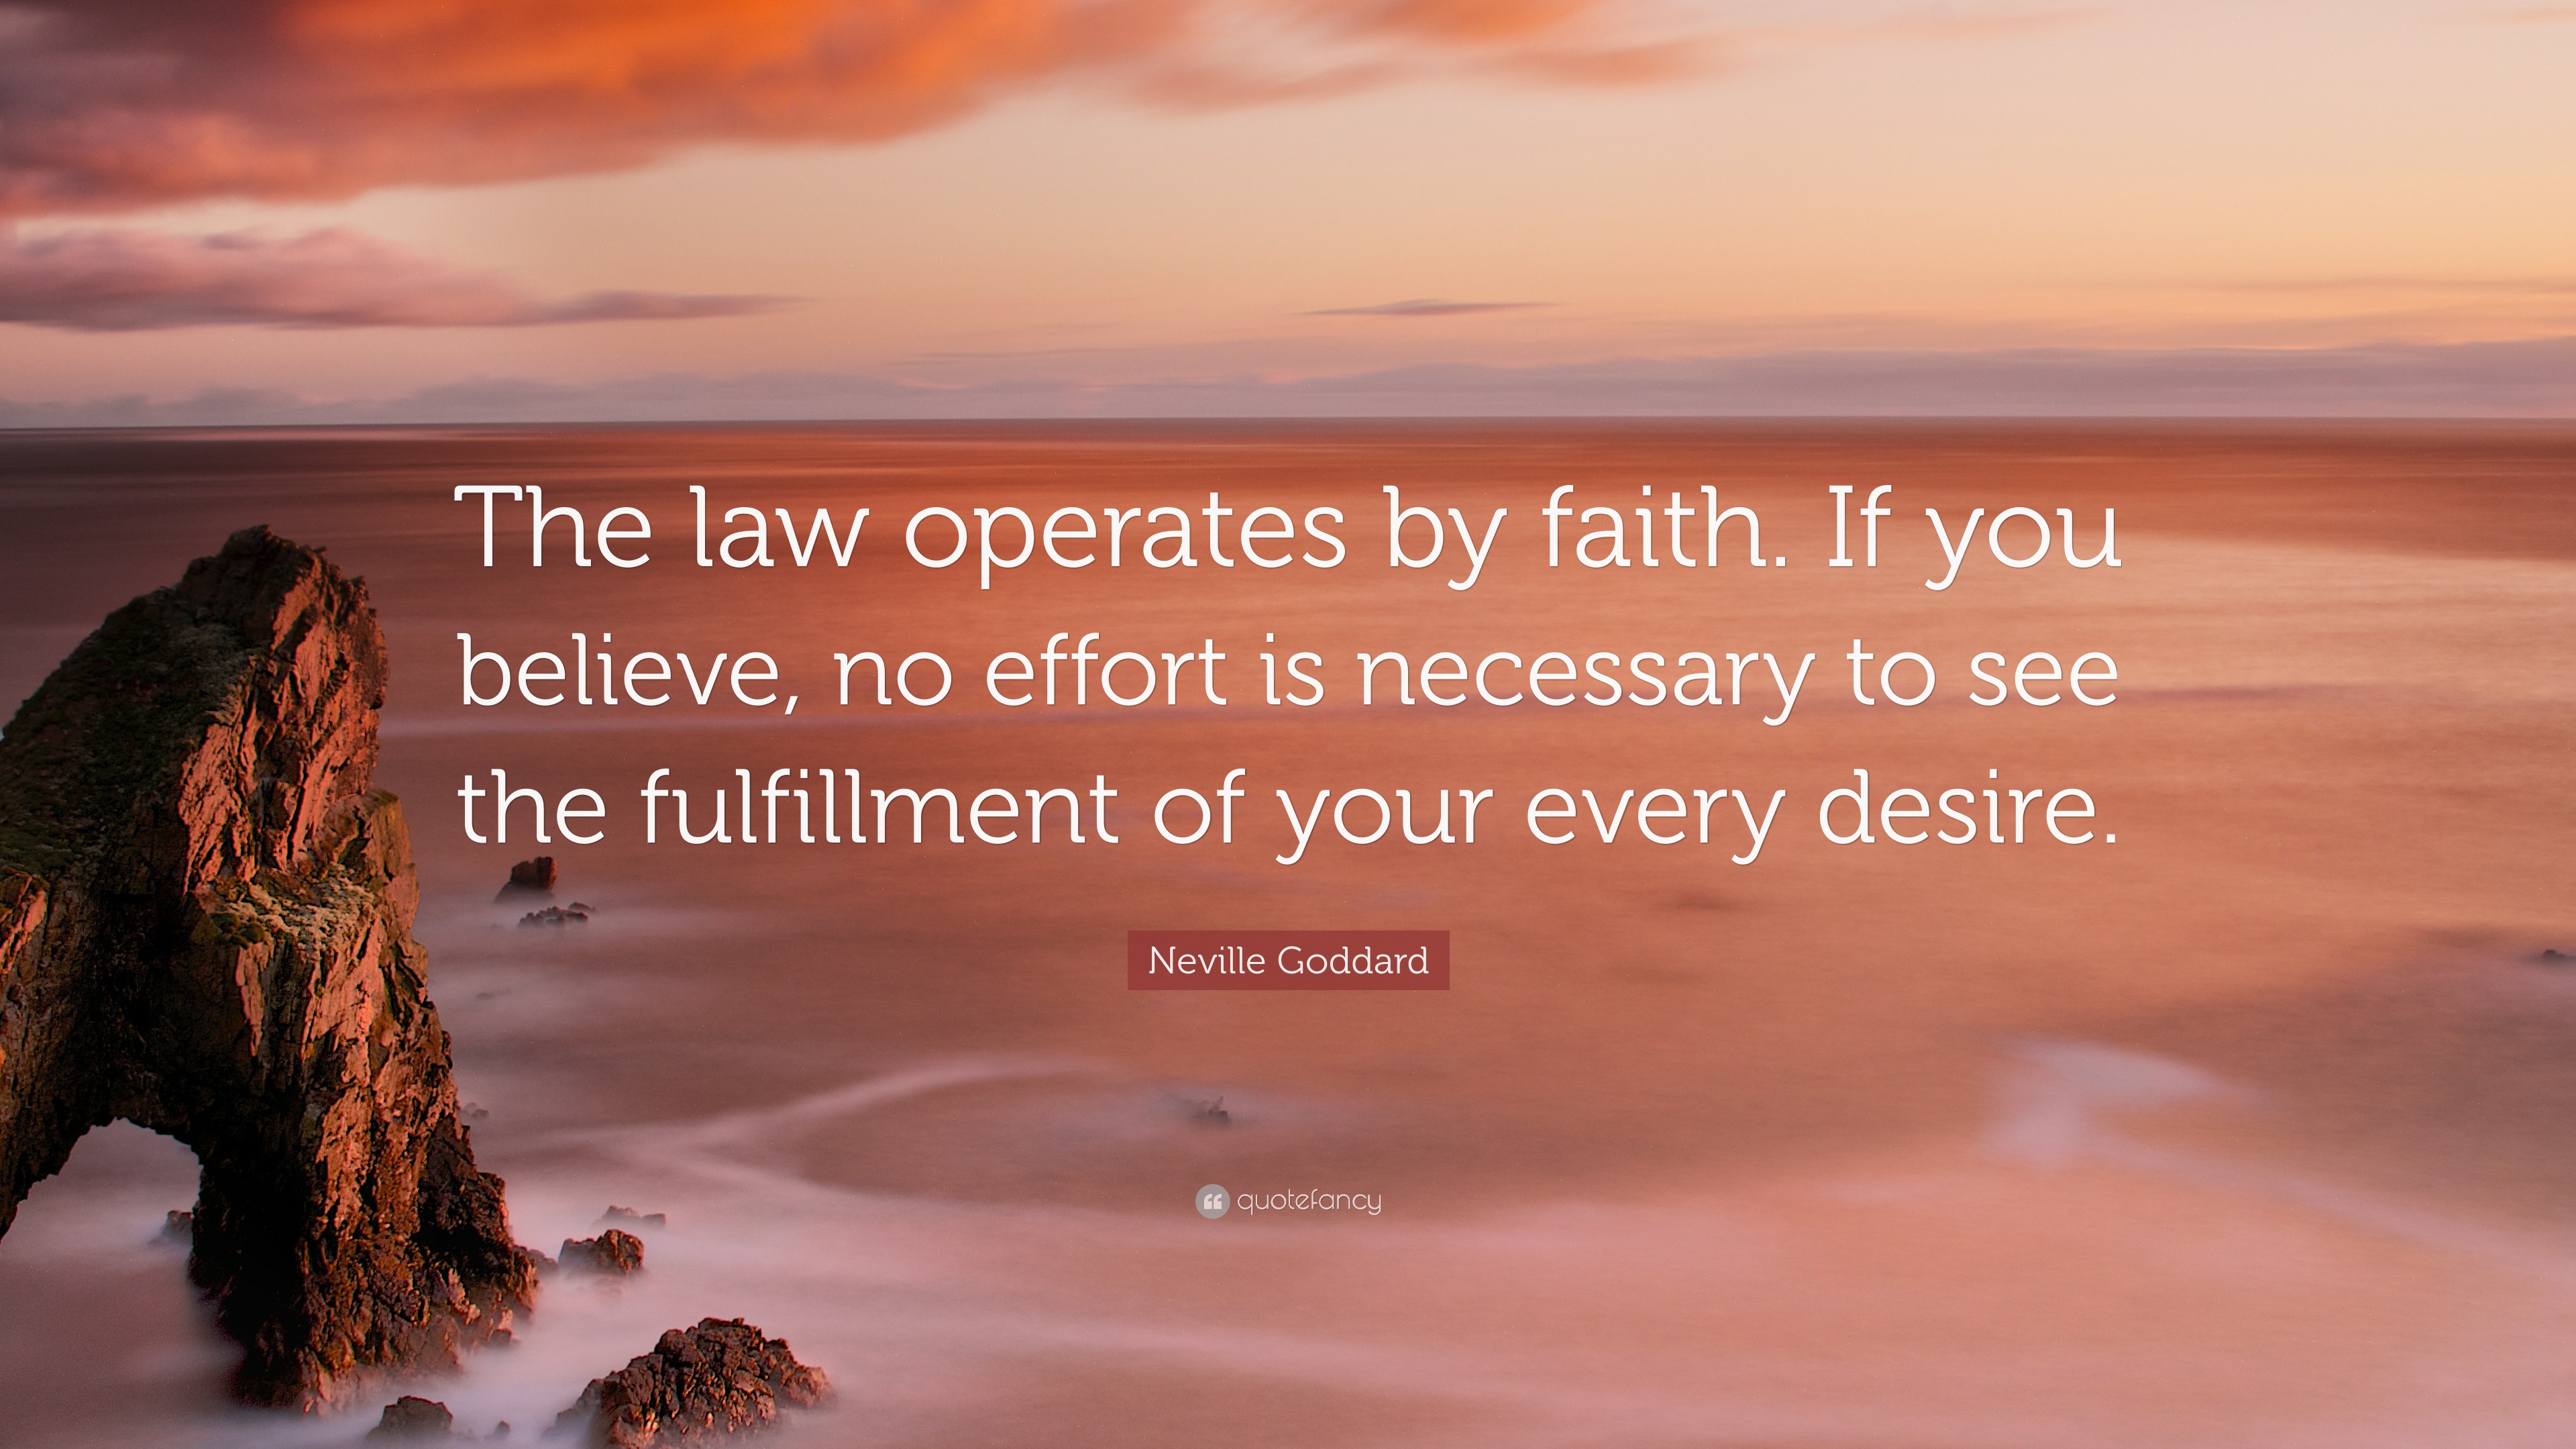 Neville Goddard Quote: “The law operates by faith. If you believe, no  effort is necessary to